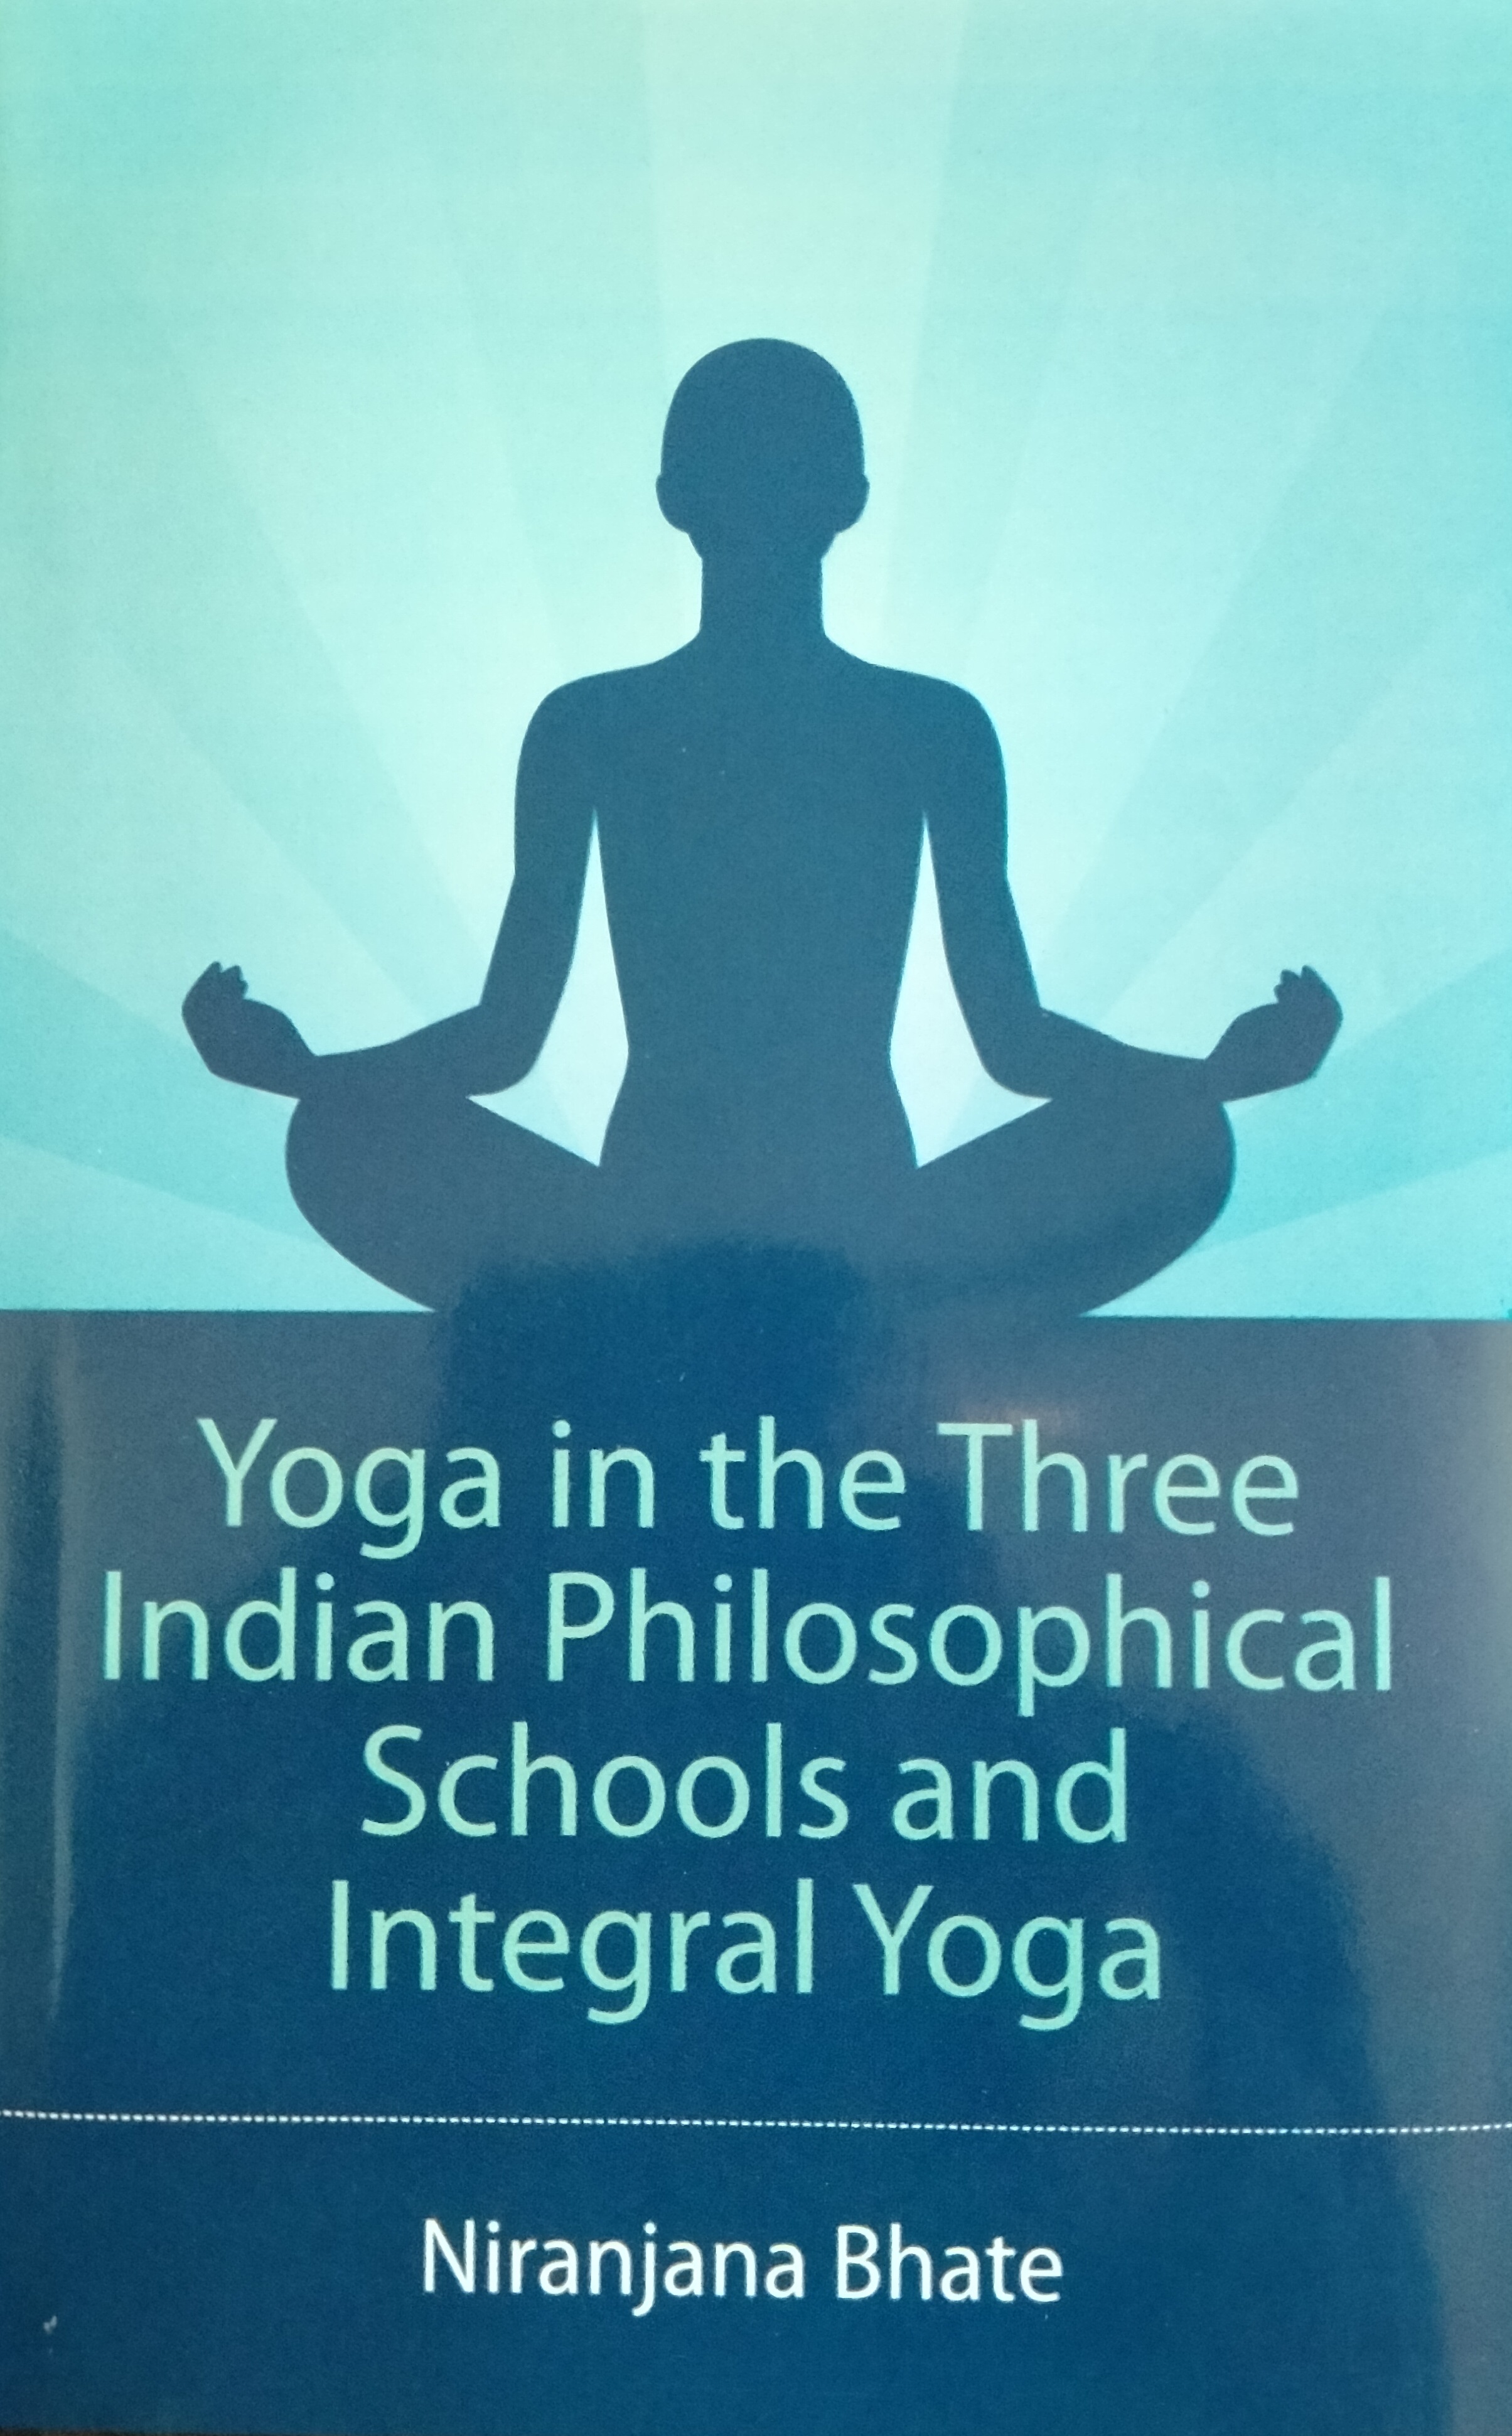 Yoga in the Three Indian Philosophical Schools and Integral Yoga